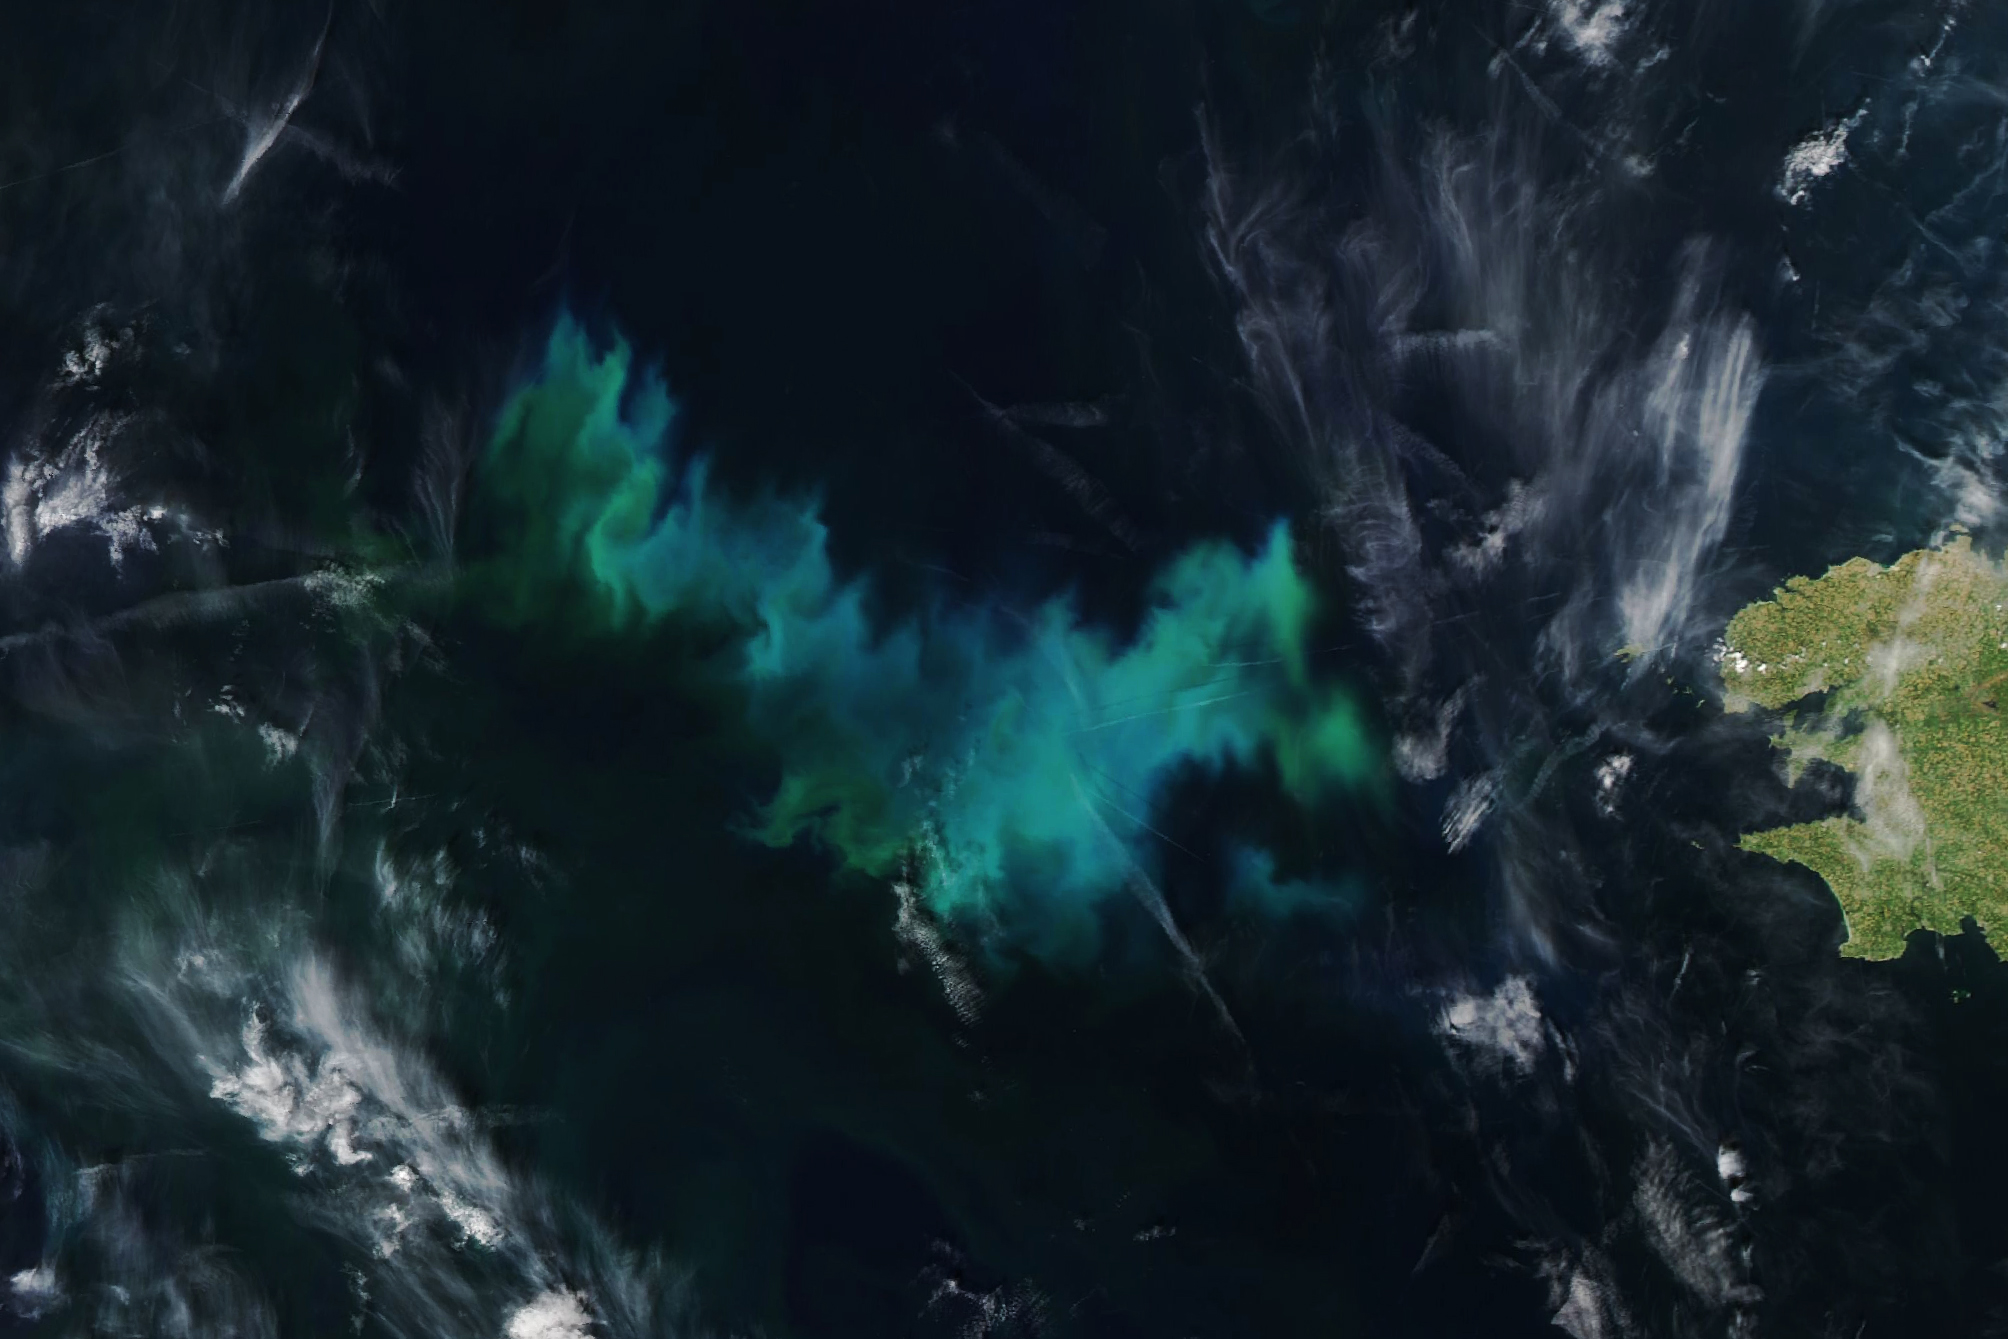 Centered in the image is a disorganized patch of light blue and green color in the dark surrounding ocean. Some slight swirling within the colorful area is visible, thin windswept clouds are scattered primarily in the lower left and the mid and upper right. on the right side of the image is a bit of landmass, France, that seems to be largely green, but polka dotted with yellows throughout.